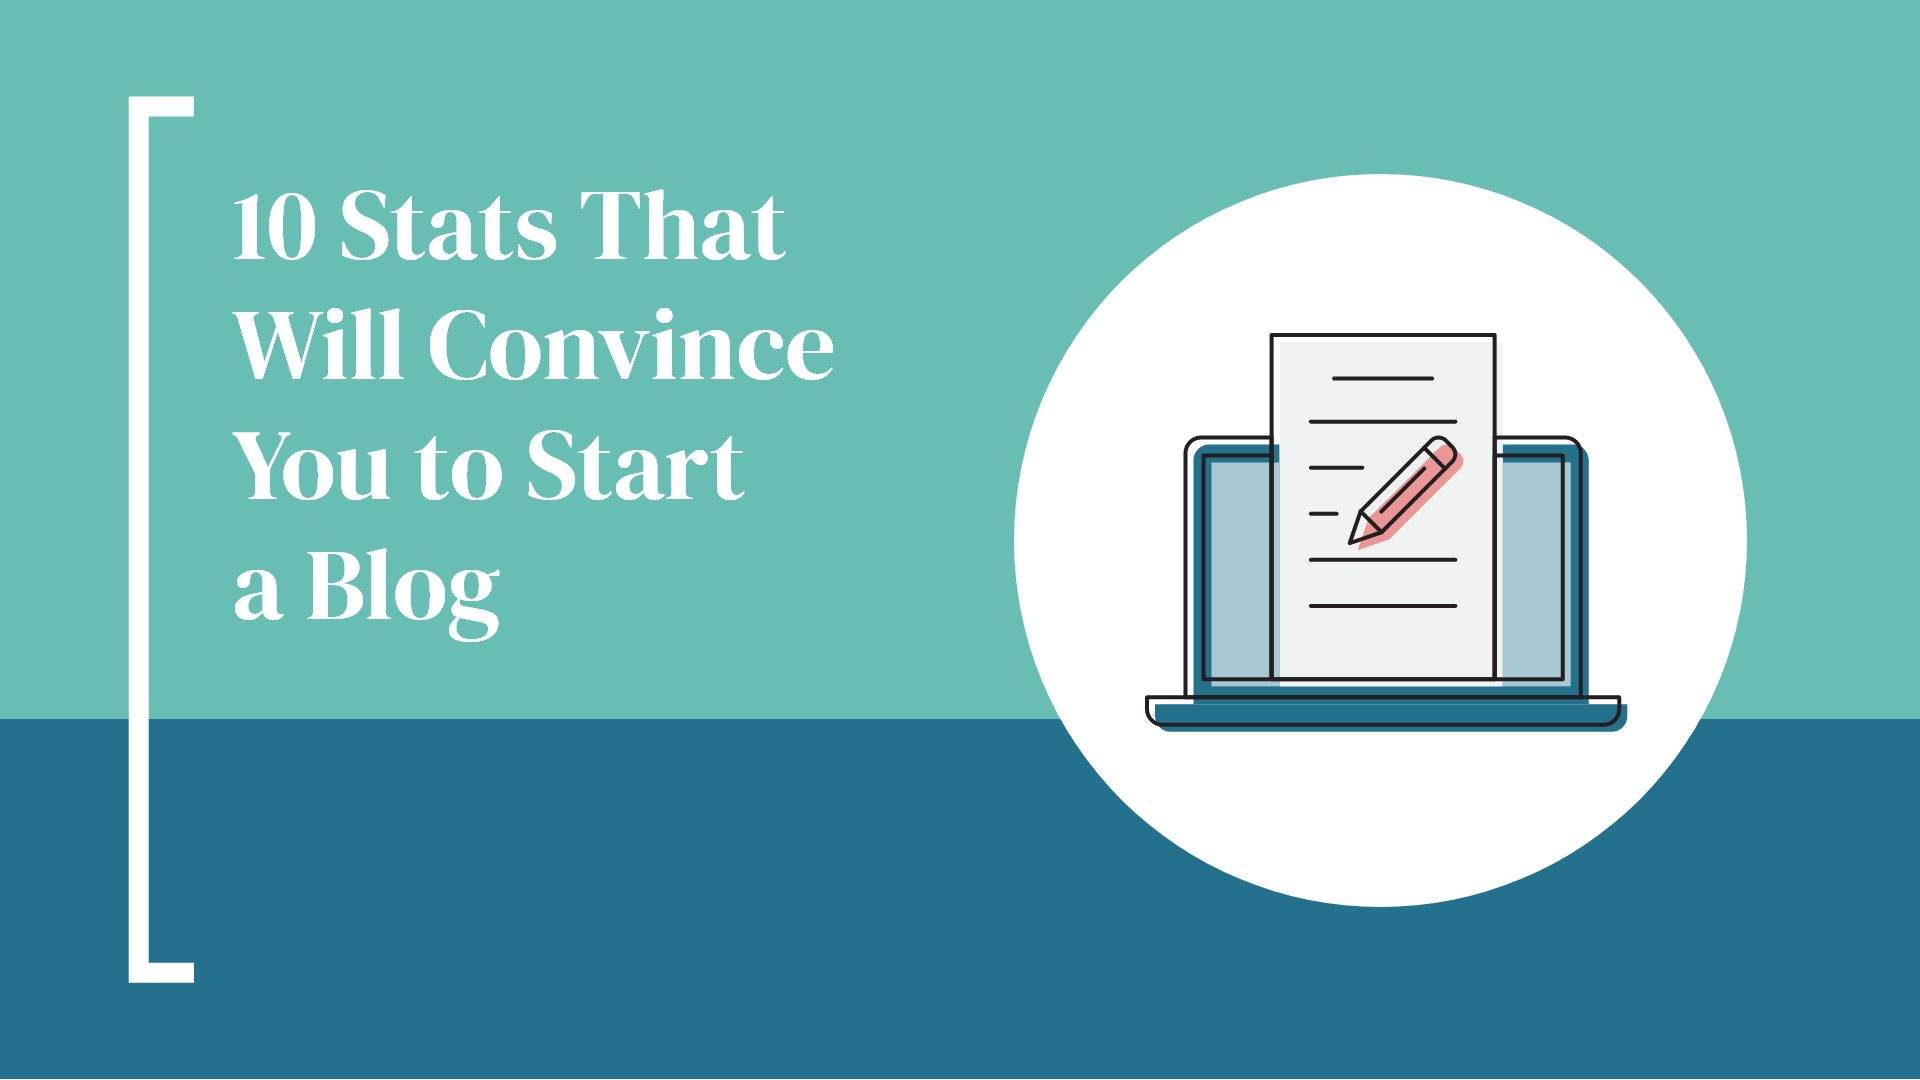 10 Stats That Will Convince You to Start a Blog